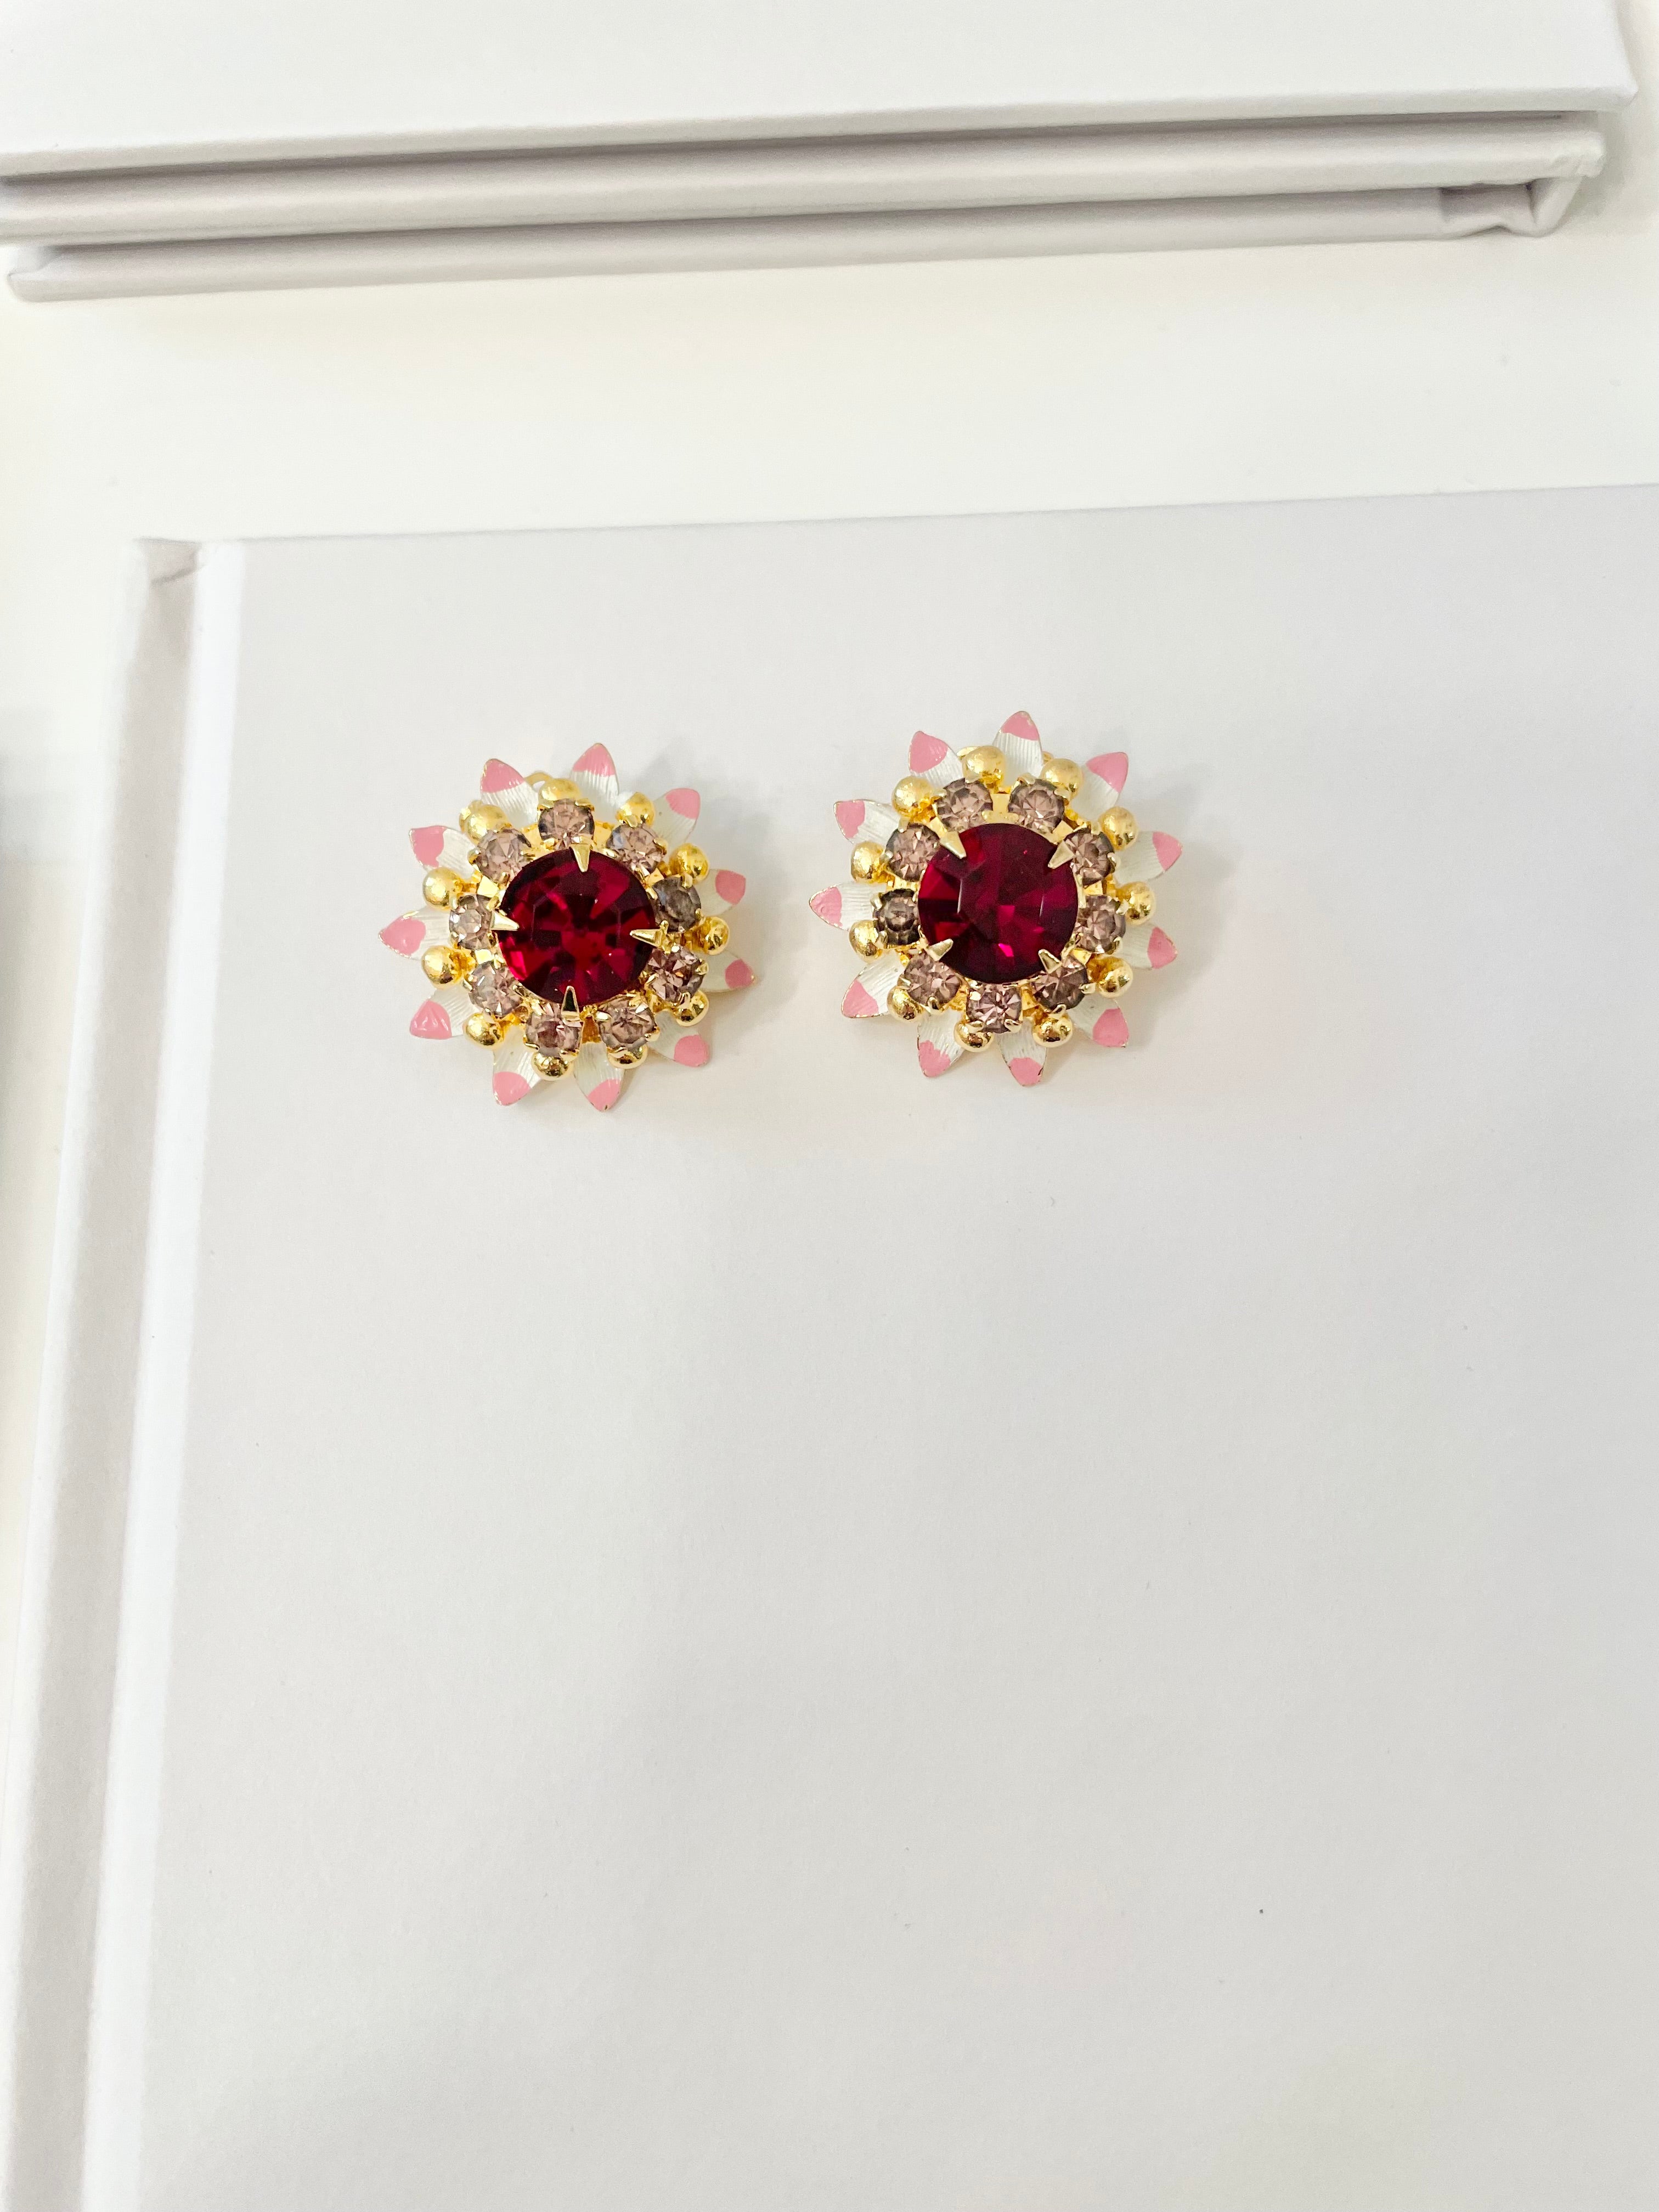 The Flirty gal and her love of all things pink! These 1960's pink flower earrings are truly divine....